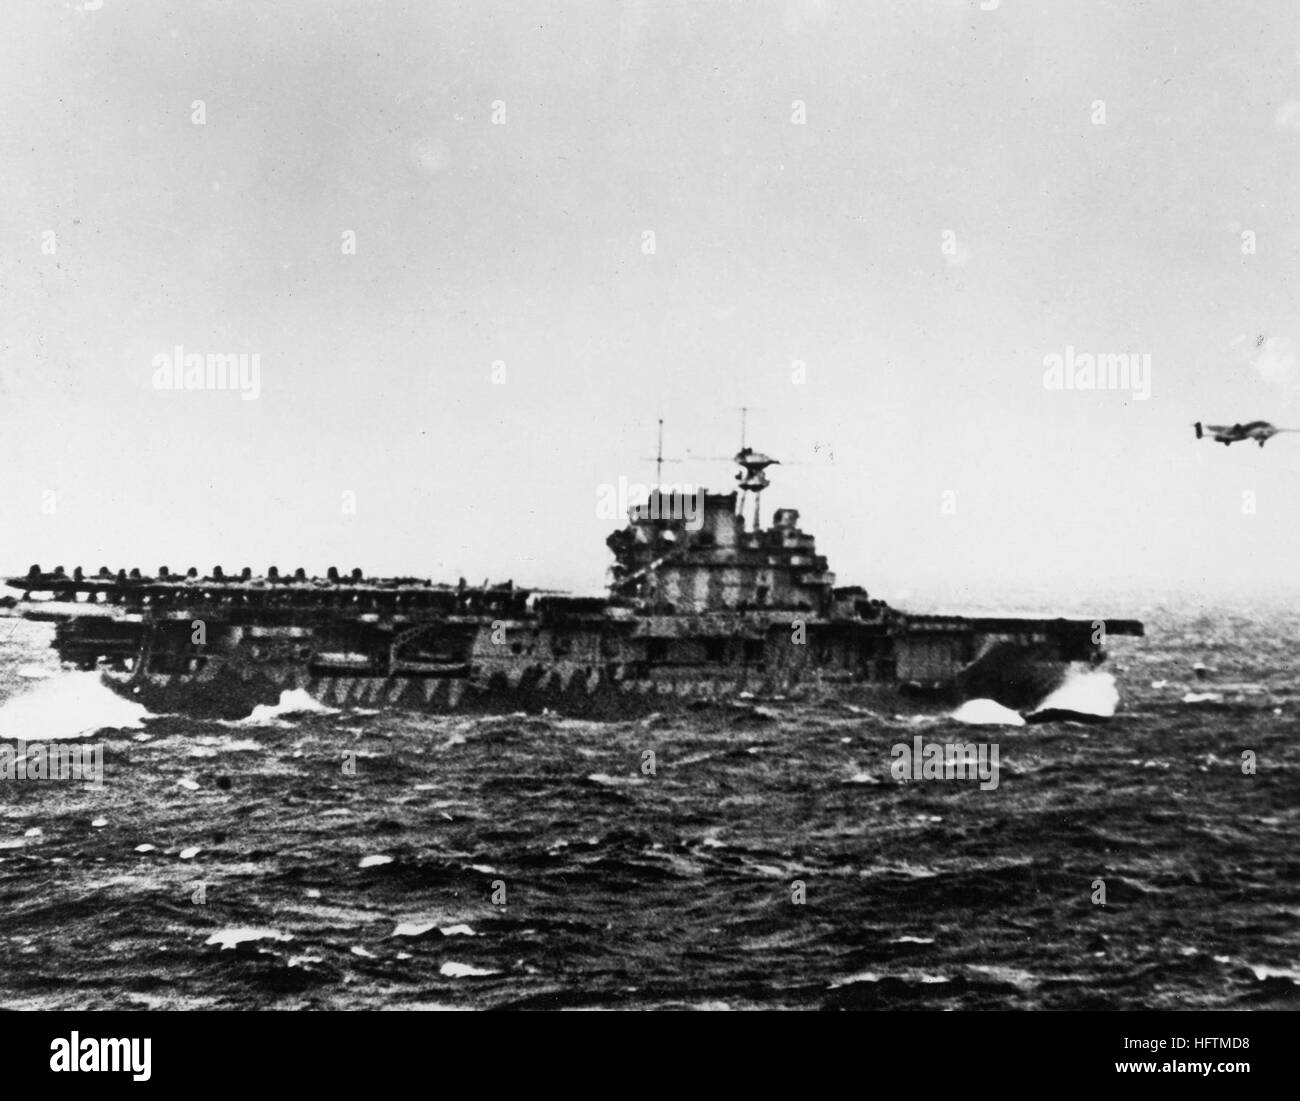 USS HORNET, PACIFIC OCEAN 1942 -- Lt. Col. James 'Jimmy' Doolittle takes off from the USS Hornet 650 miles from Japan on a top-secret bombing mission. The Doolittle Raid, U.S. Army Air Force special order #1 of World War II, was a daring one-way mission of 16 B-25 Mitchell medium bombers with 80 aircrew, commanded by Colonel Doolittle, to carry out America’s first offensive attack on Japan. The crews secretly trained for two-weeks and modified the B-25s at Eglin Air Force Base's Wagner Field, Auxiliary Field 1 prior to the mission. (Photo courtesy National Museum of the U.S. Air Force) USS Hor Stock Photo